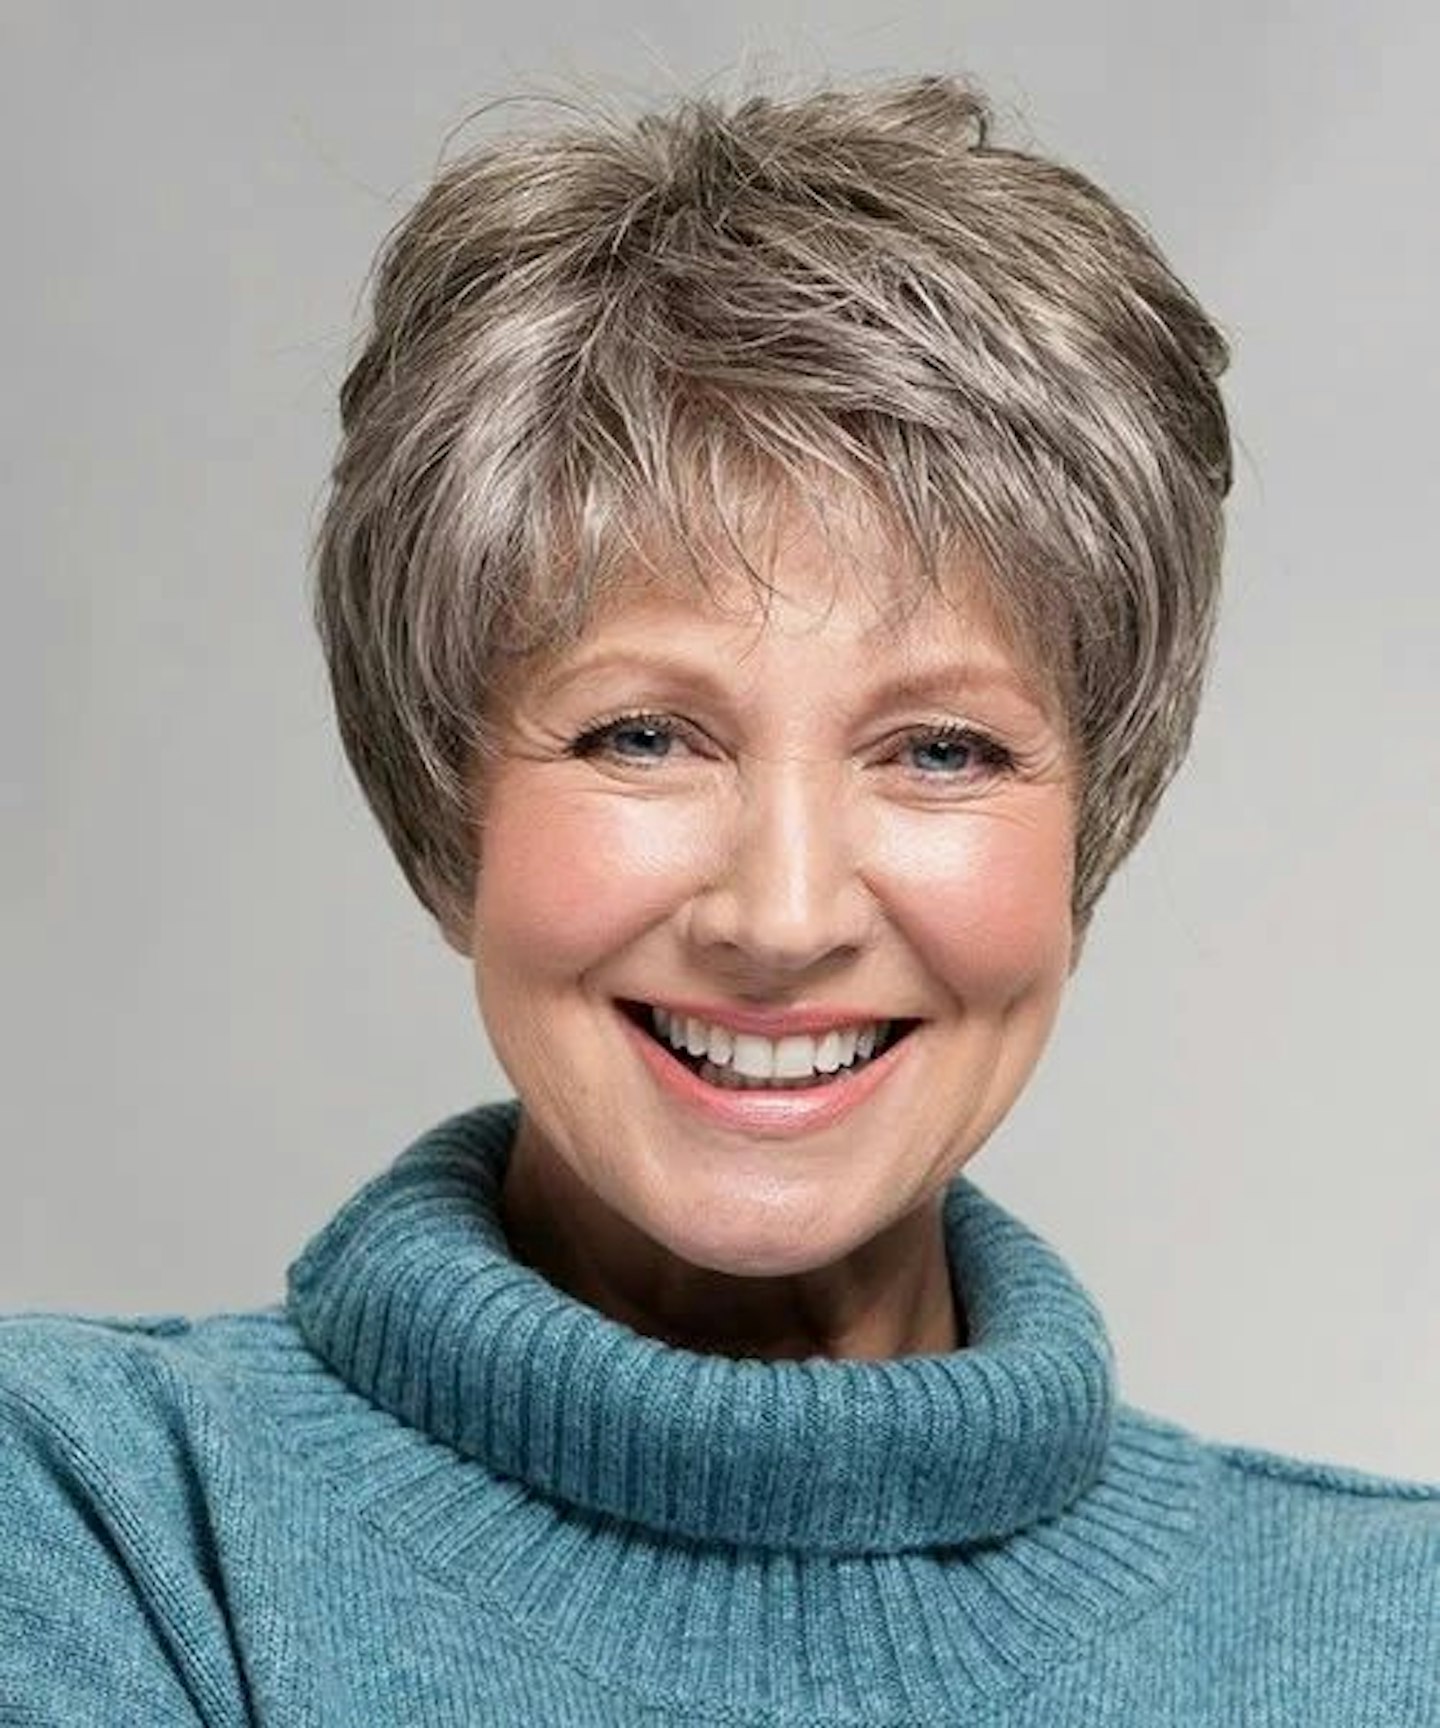 The Best Pixie Haircut For Women Over 50 That Take Years Off Your Look